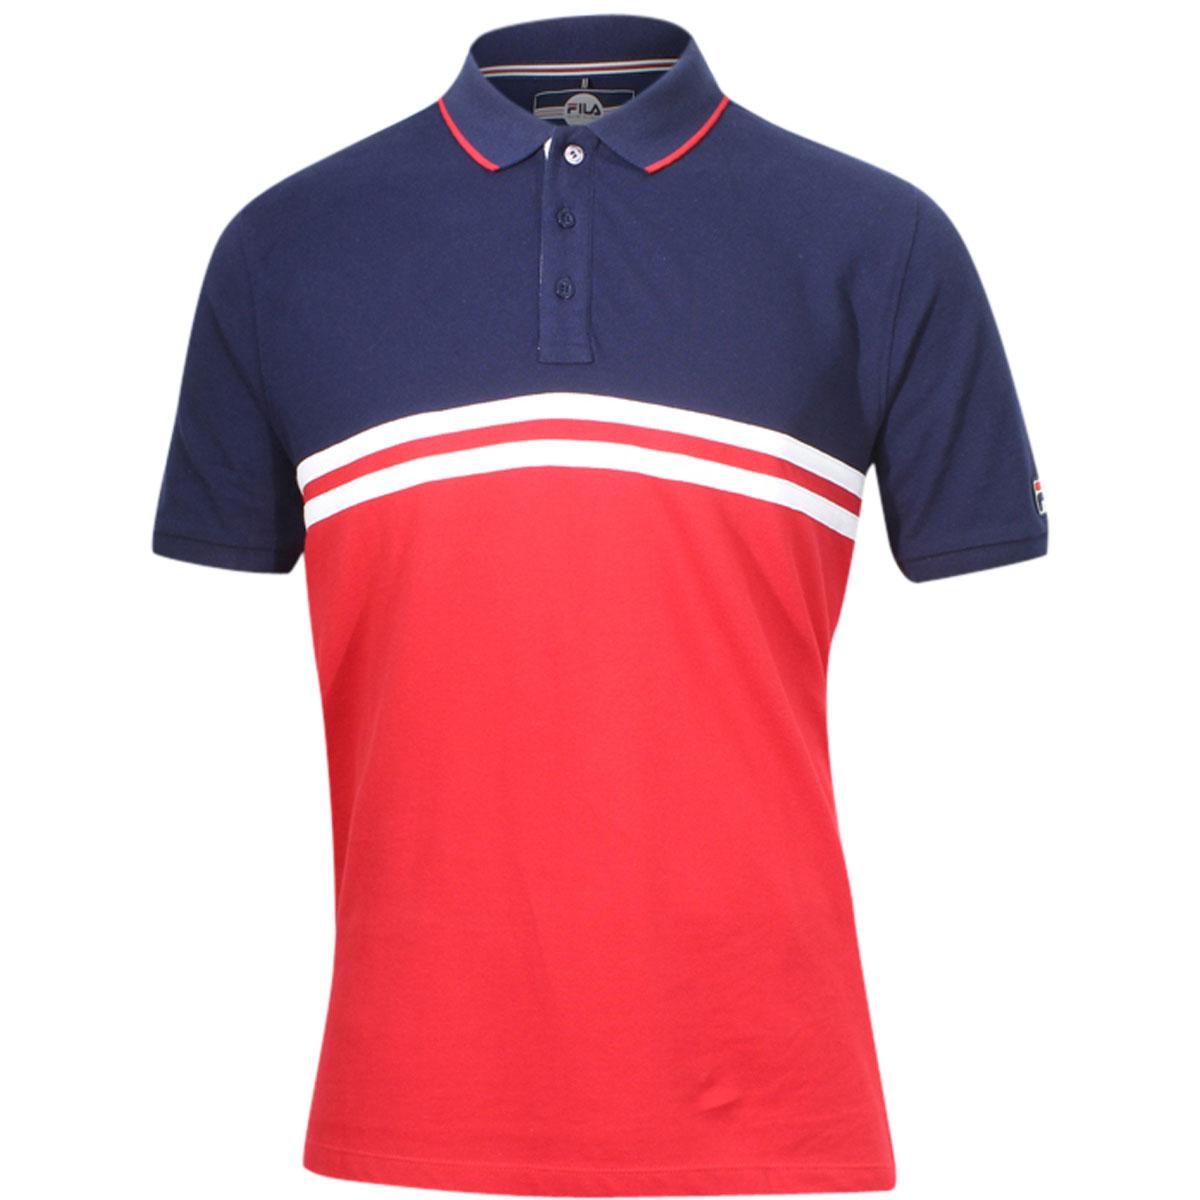 Fila Men's Dominico Short Sleeve Cotton Polo Shirt - Chinese Red/Navy/White - Large